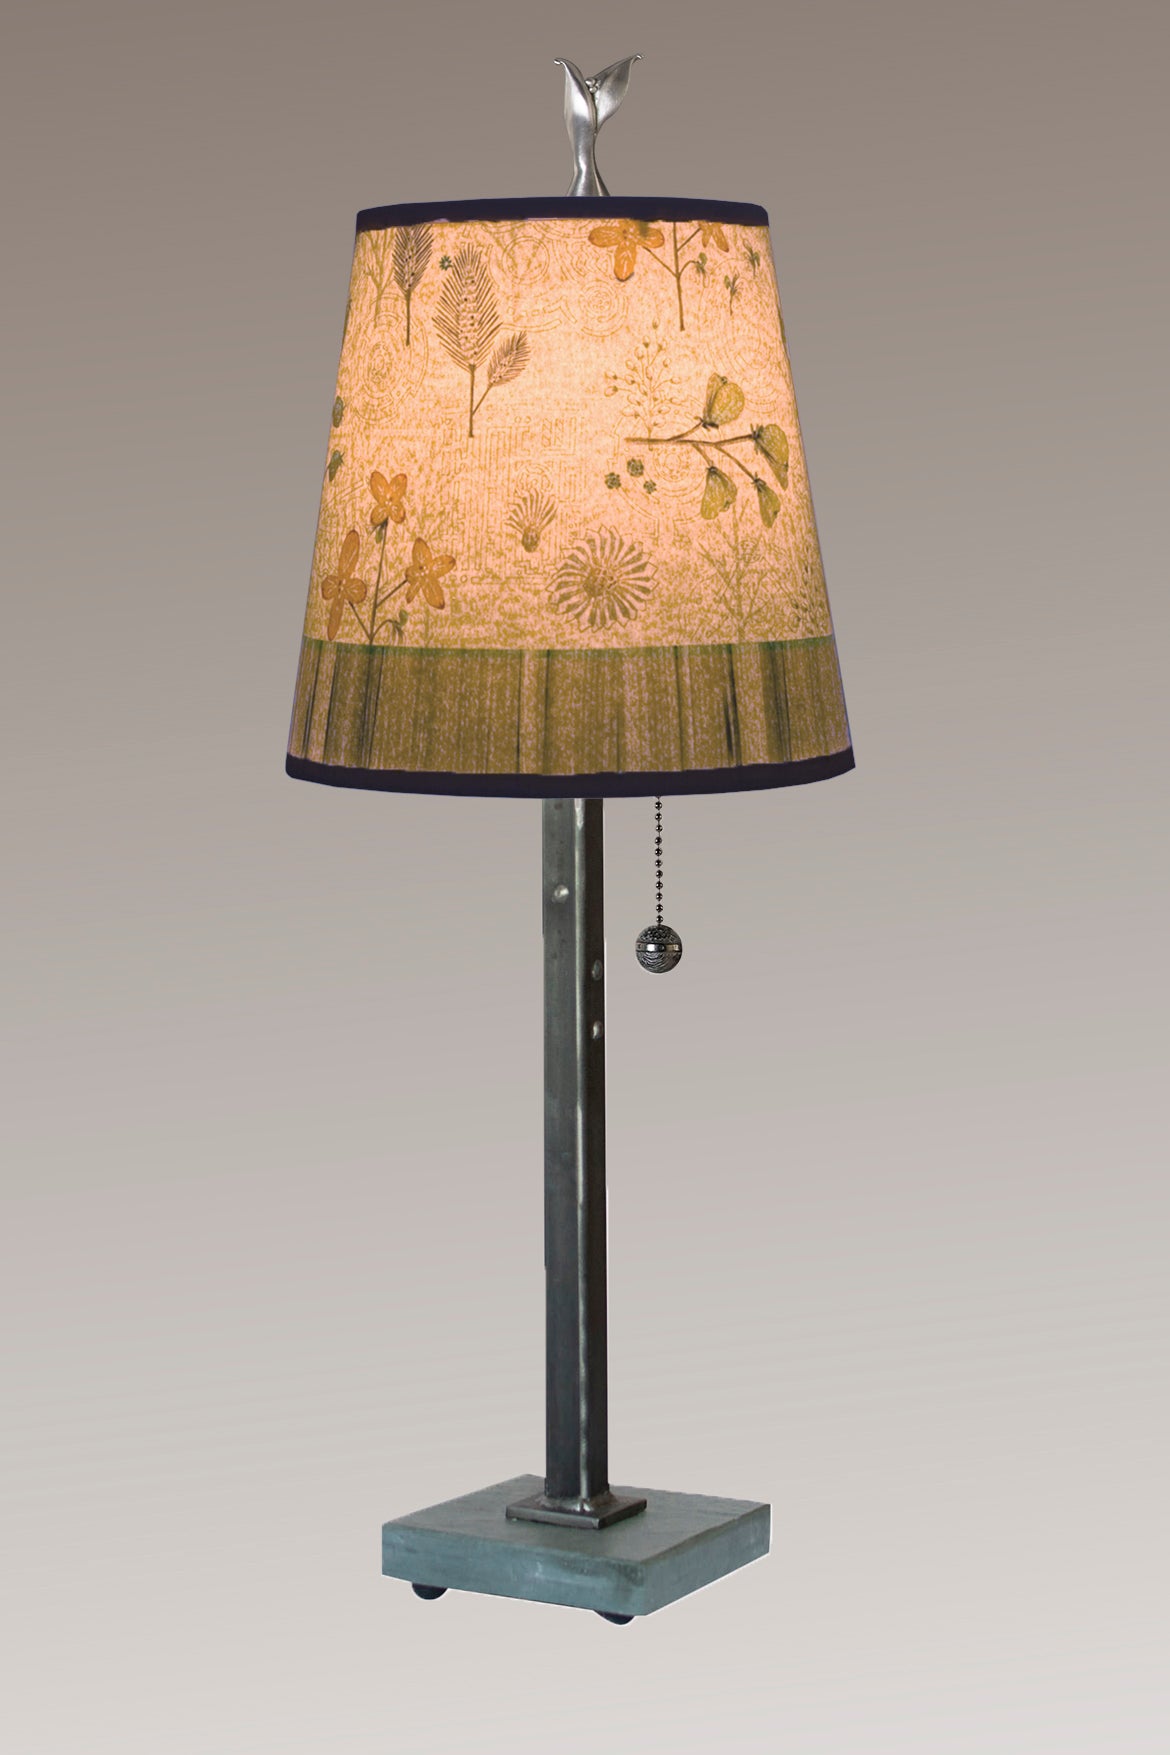 Janna Ugone & Co Table Lamps Steel Table Lamp with Small Drum Shade in Flora & Maze